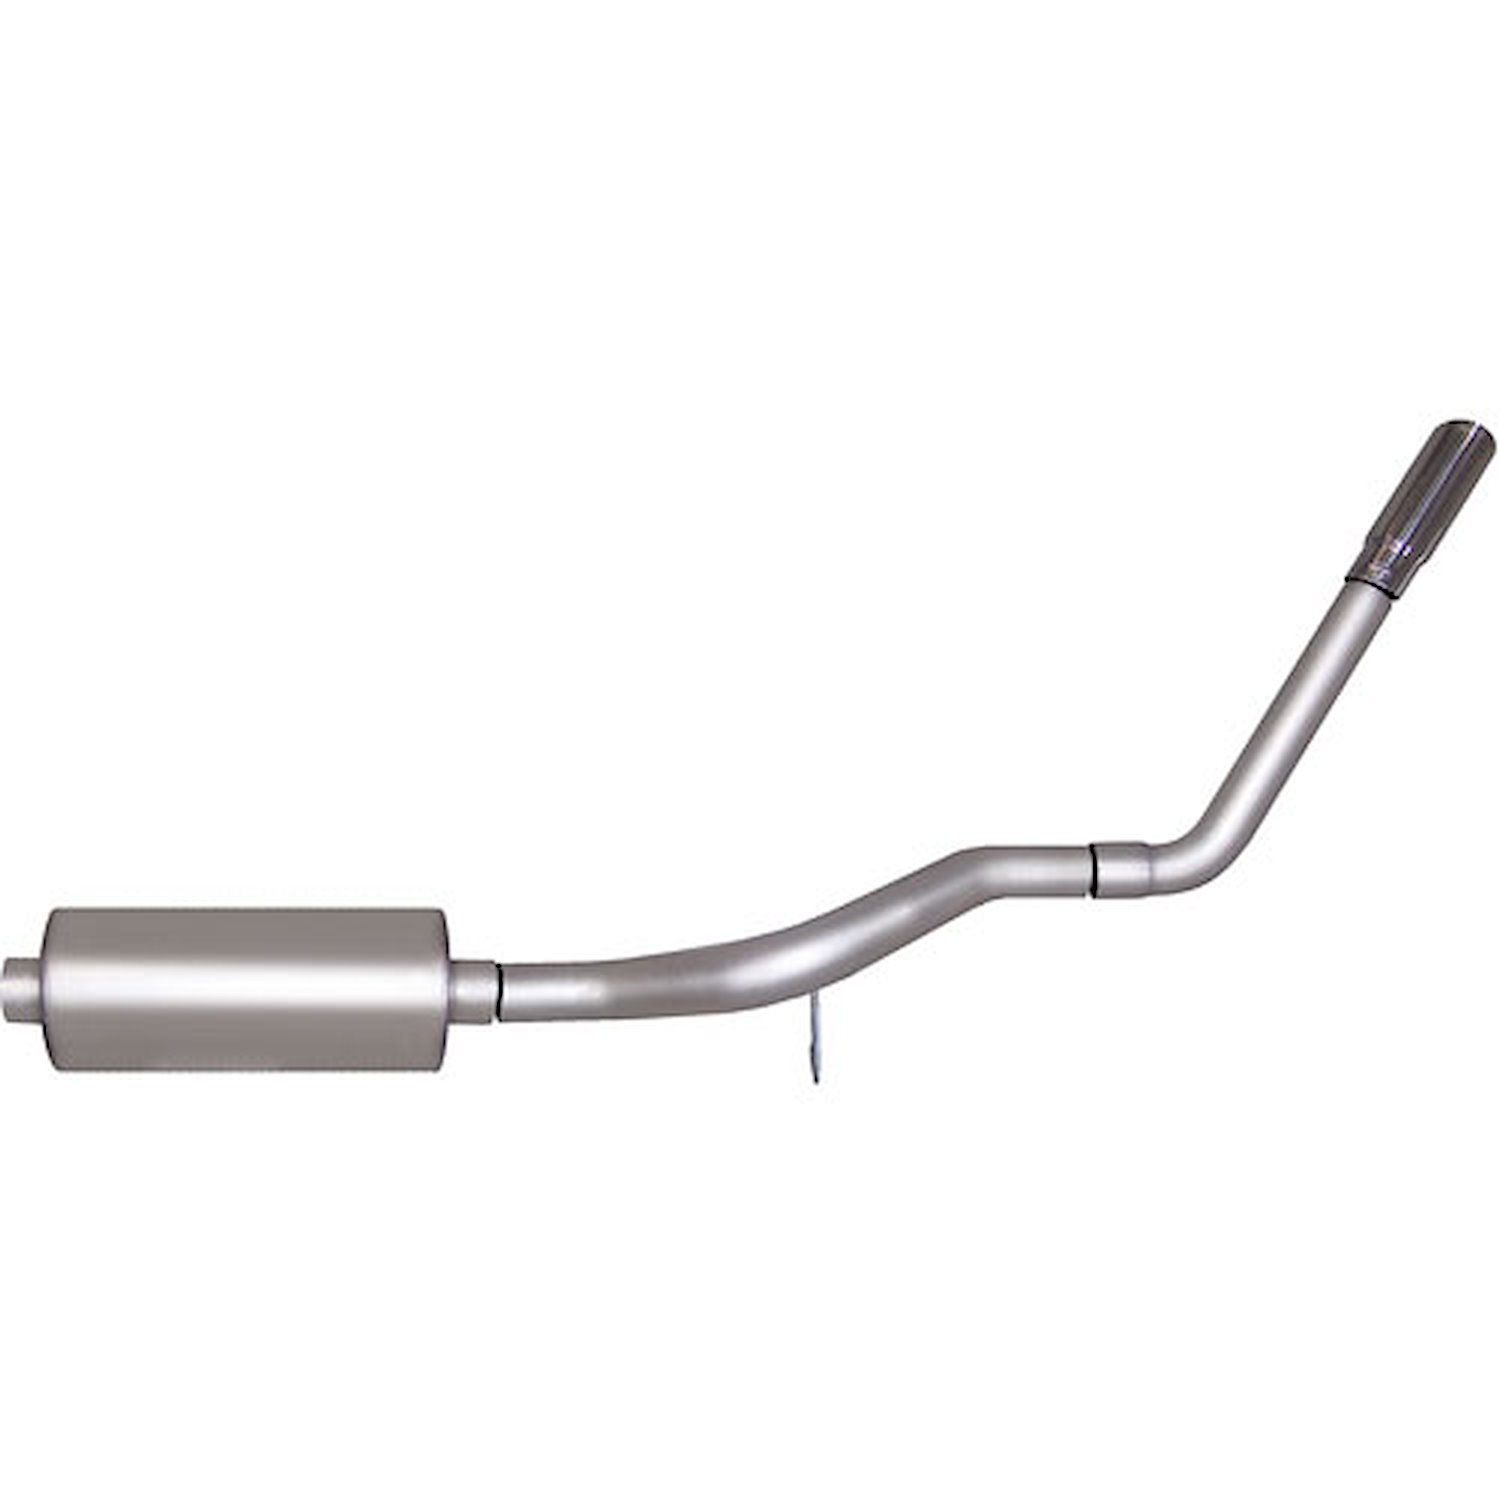 Swept-Side Cat-Back Exhaust 1993-97 Ford F-250/F-350 7.5L